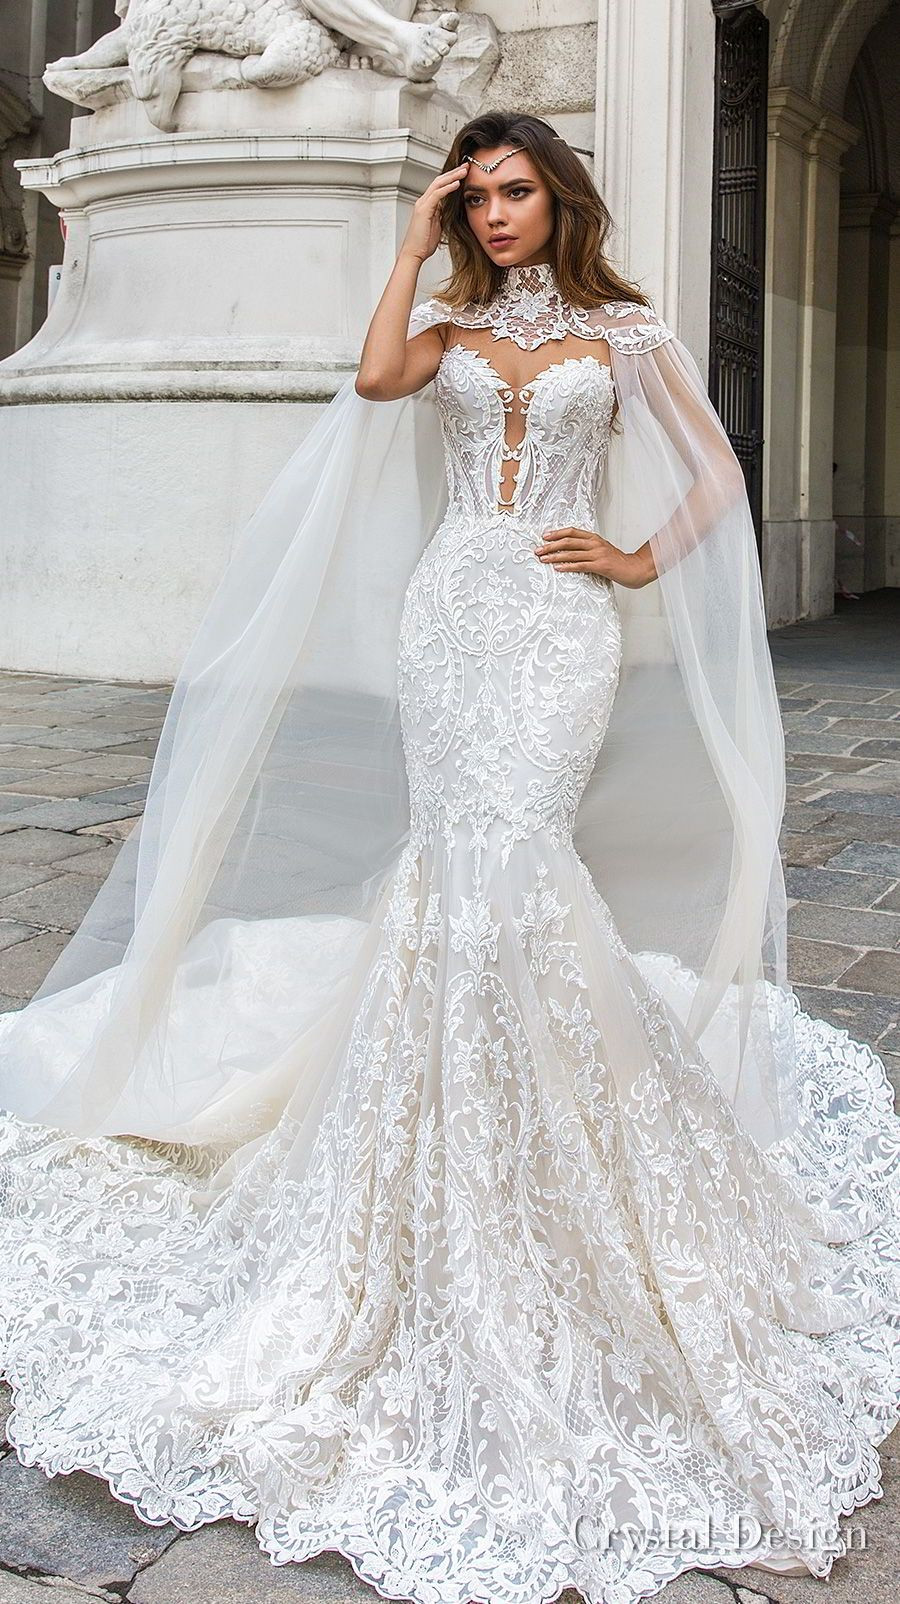 Most Expensive Wedding Dresses
 Most Expensive Wedding Gowns 2018 Crystal Design 2018